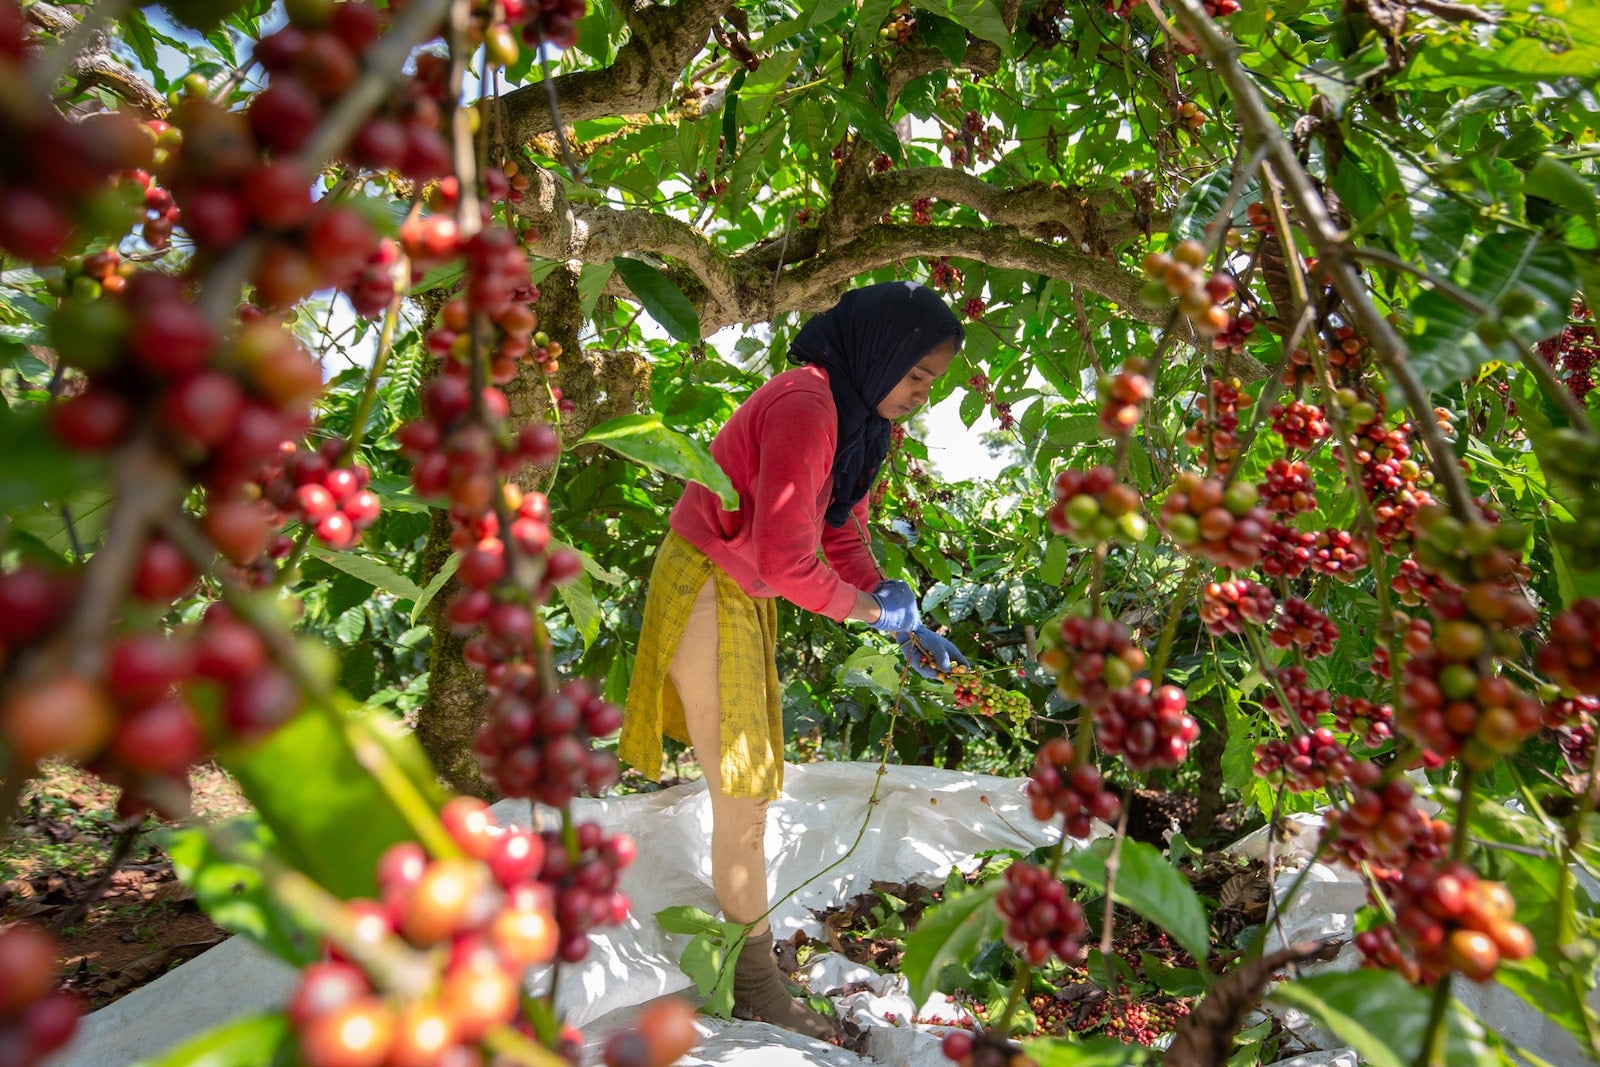 A woman in a black headscarf picks red berries off a tree.